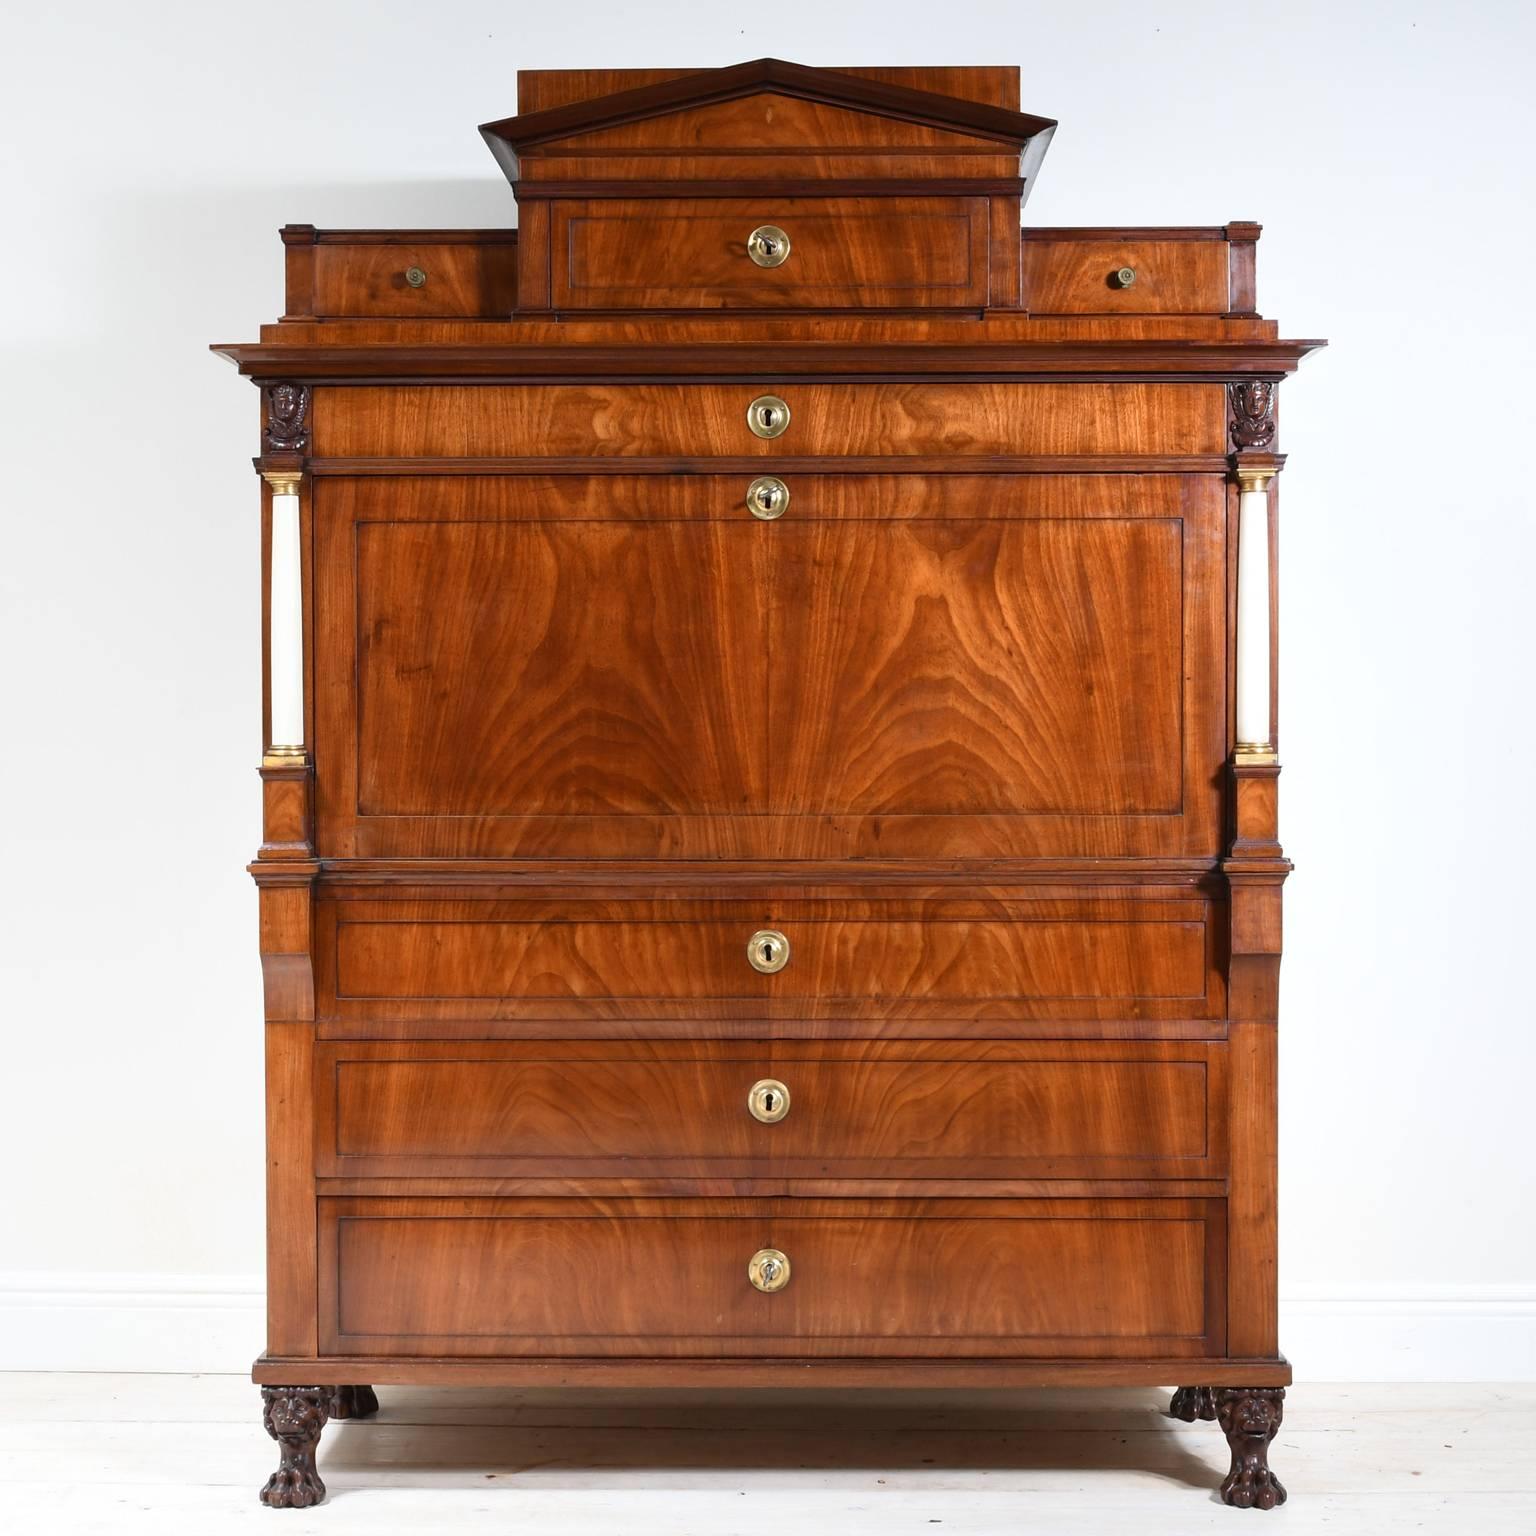 From the estate of Swedish Architect Alfred Grenander, from Villa Tångvallen, in Falsterbo Sweden. This extraordinary Neoclassical Secretary in West Indies mahogany is a masterwork by the Stockholm master cabinet maker Johan Högman. The Secretary